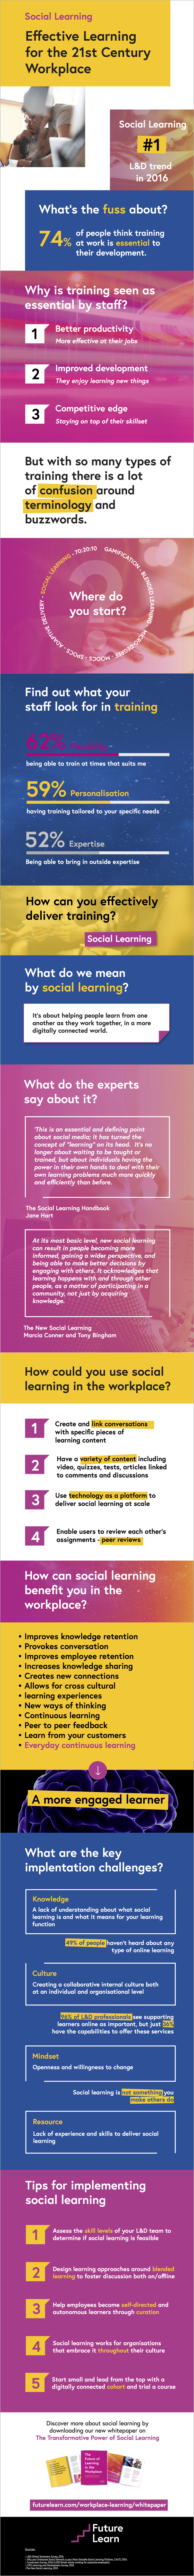 FutureLearn social learning infographic